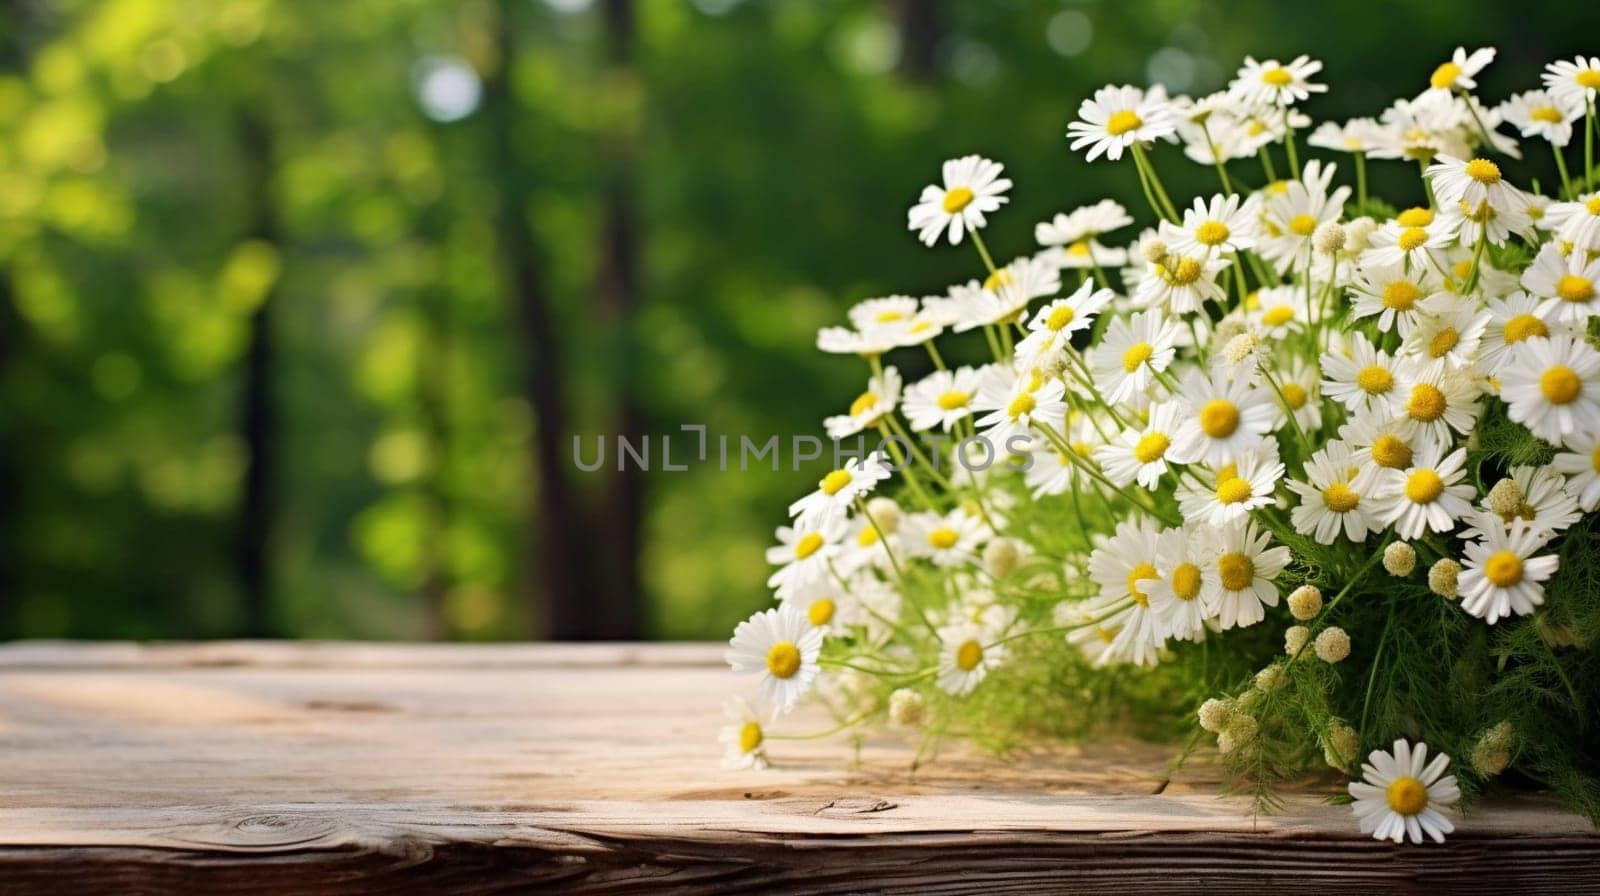 Bouquet of fresh daisies on a wooden table outdoors, green forest background by kizuneko